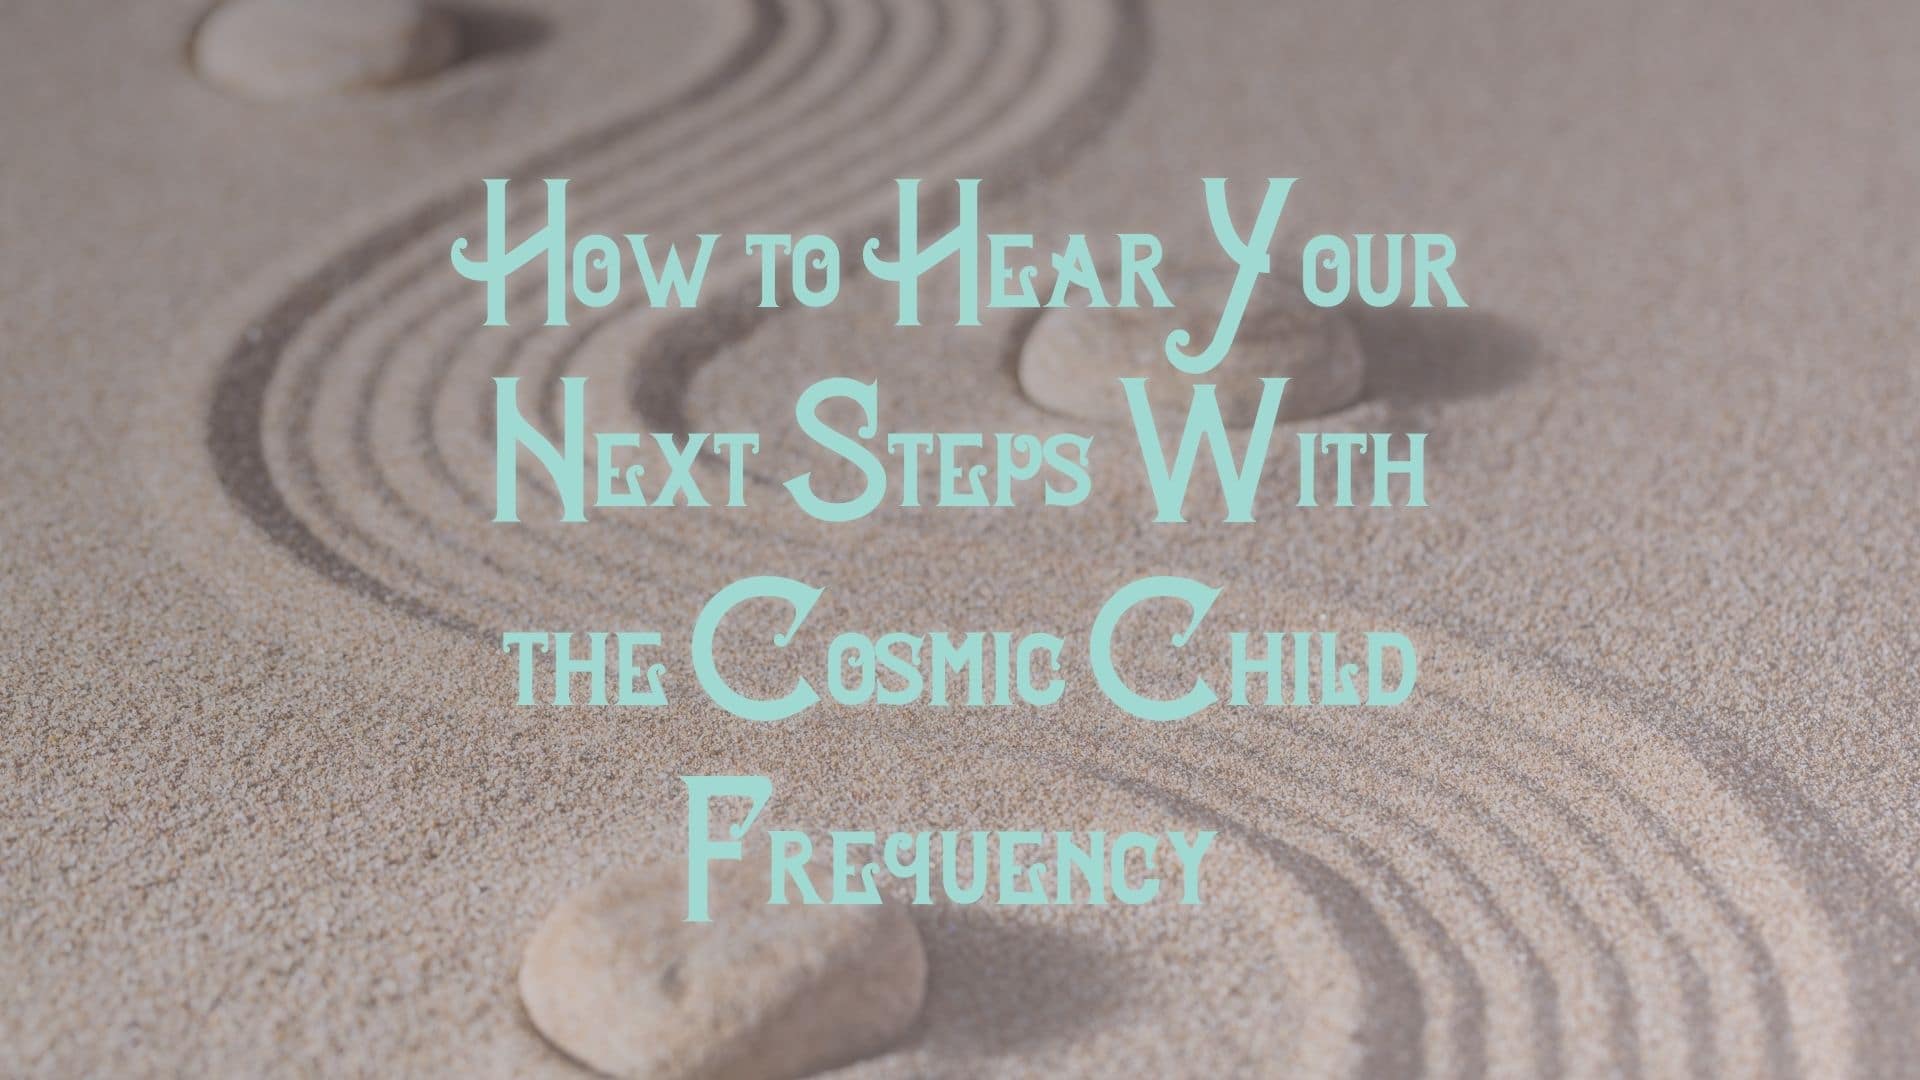 How to Hear Your Next Steps With the Cosmic Child Archetype